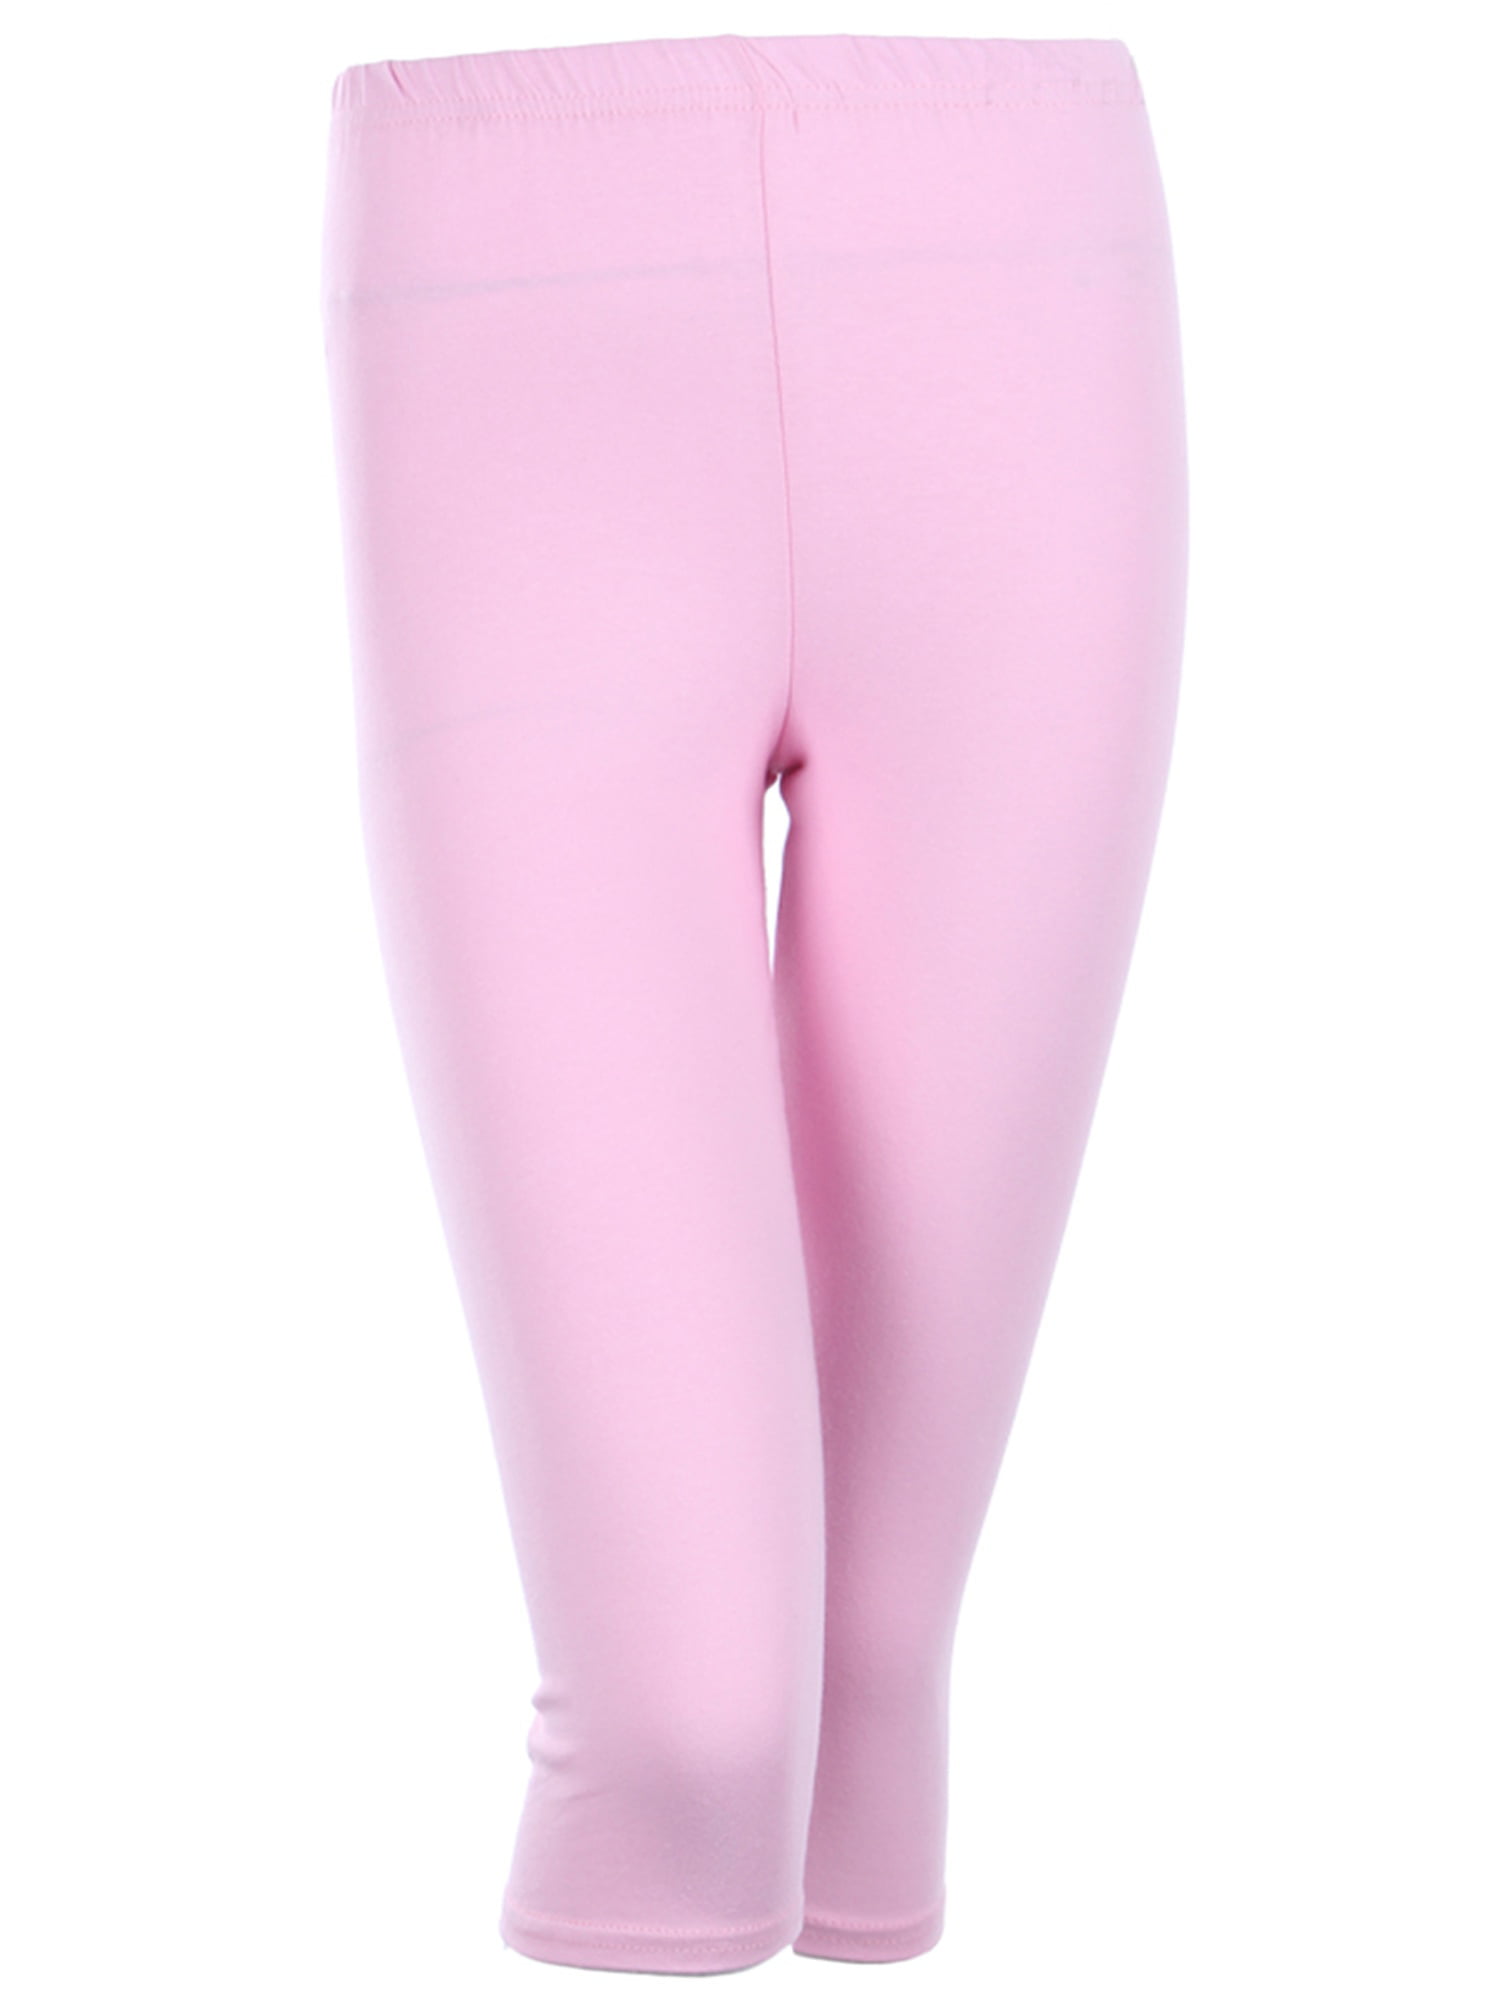 Pink Ladies Plain Cotton Legging, Size: Small at Rs 120 in Alipur